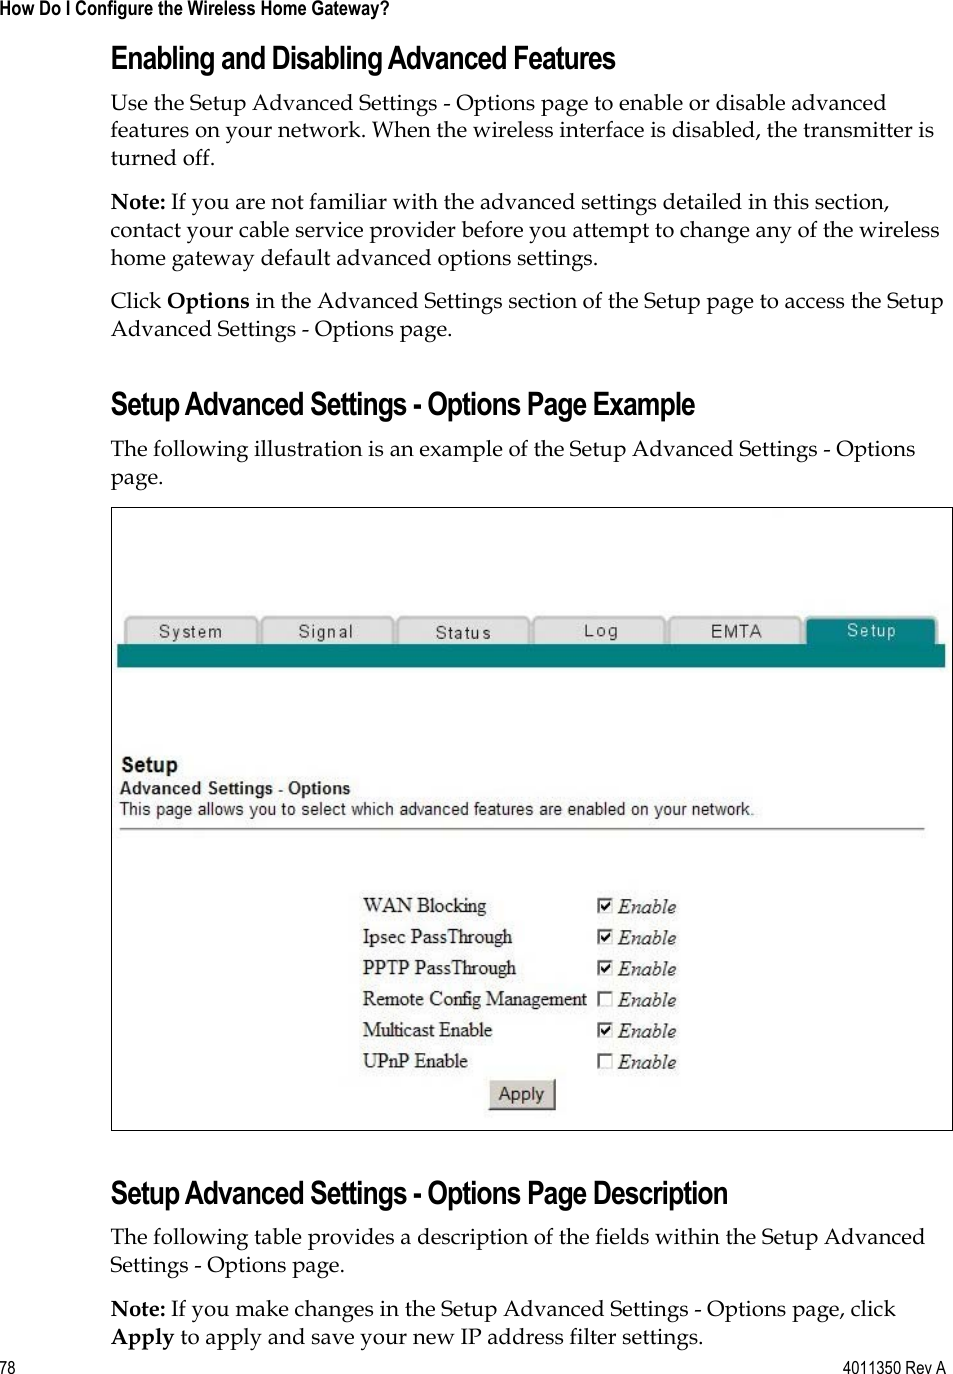 78    4011350 Rev A How Do I Configure the Wireless Home Gateway? Enabling and Disabling Advanced Features Use the Setup Advanced Settings - Options page to enable or disable advanced features on your network. When the wireless interface is disabled, the transmitter is turned off. Note: If you are not familiar with the advanced settings detailed in this section, contact your cable service provider before you attempt to change any of the wireless home gateway default advanced options settings. Click Options in the Advanced Settings section of the Setup page to access the Setup Advanced Settings - Options page. Setup Advanced Settings - Options Page Example The following illustration is an example of the Setup Advanced Settings - Options page.Setup Advanced Settings - Options Page Description The following table provides a description of the fields within the Setup Advanced Settings - Options page. Note: If you make changes in the Setup Advanced Settings - Options page, click Apply to apply and save your new IP address filter settings. 